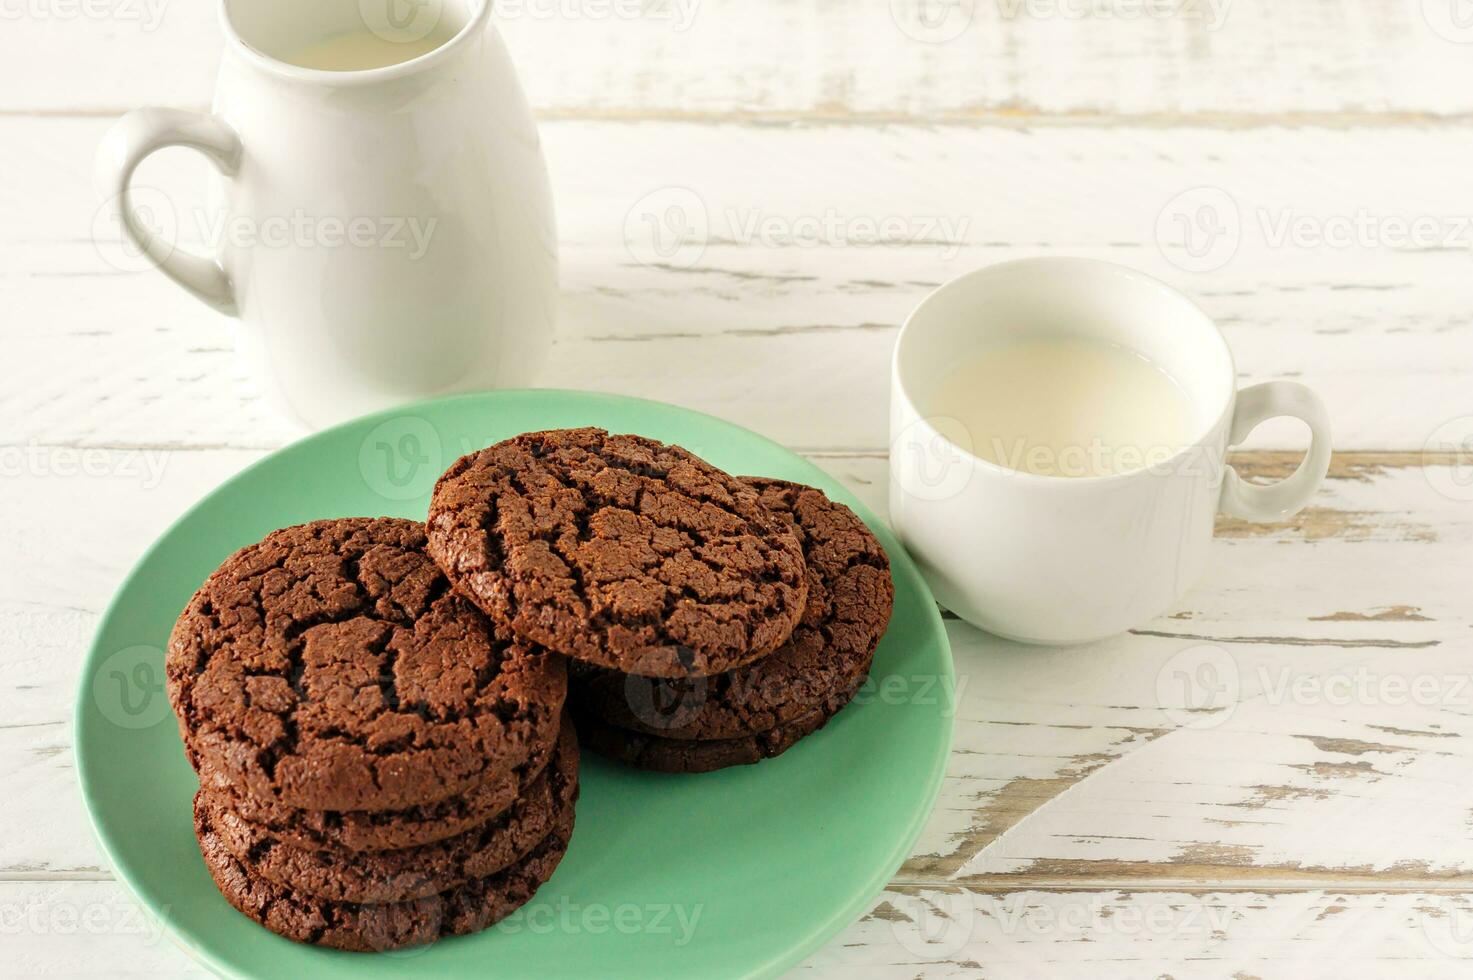 Chocolate cookies for breakfast with a glass of milk on a white wooden table. photo